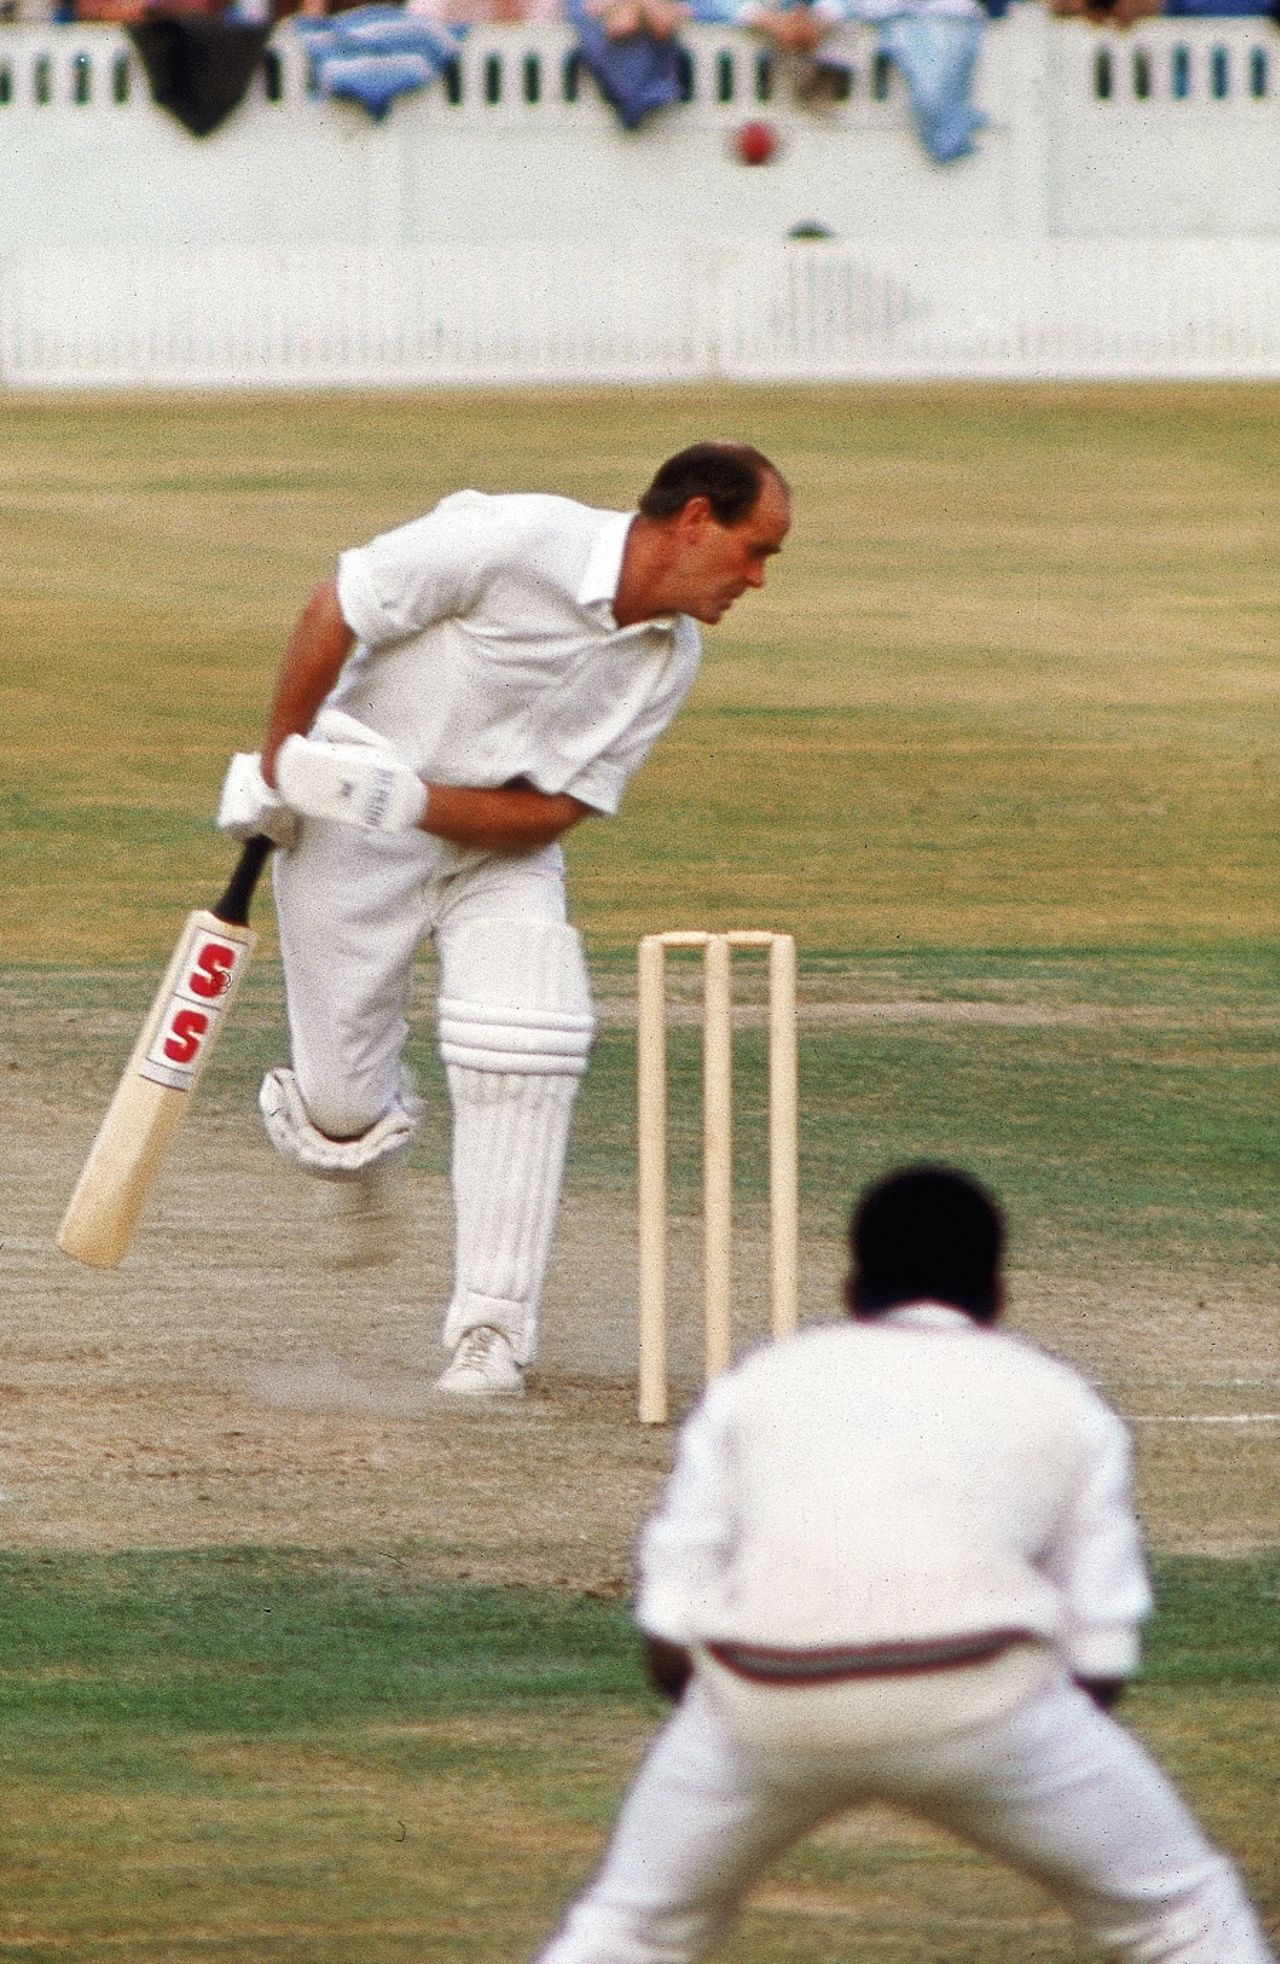 Brian Close in the firing line at Old Trafford, England v West Indies, 3rd Test, July 10, 1976